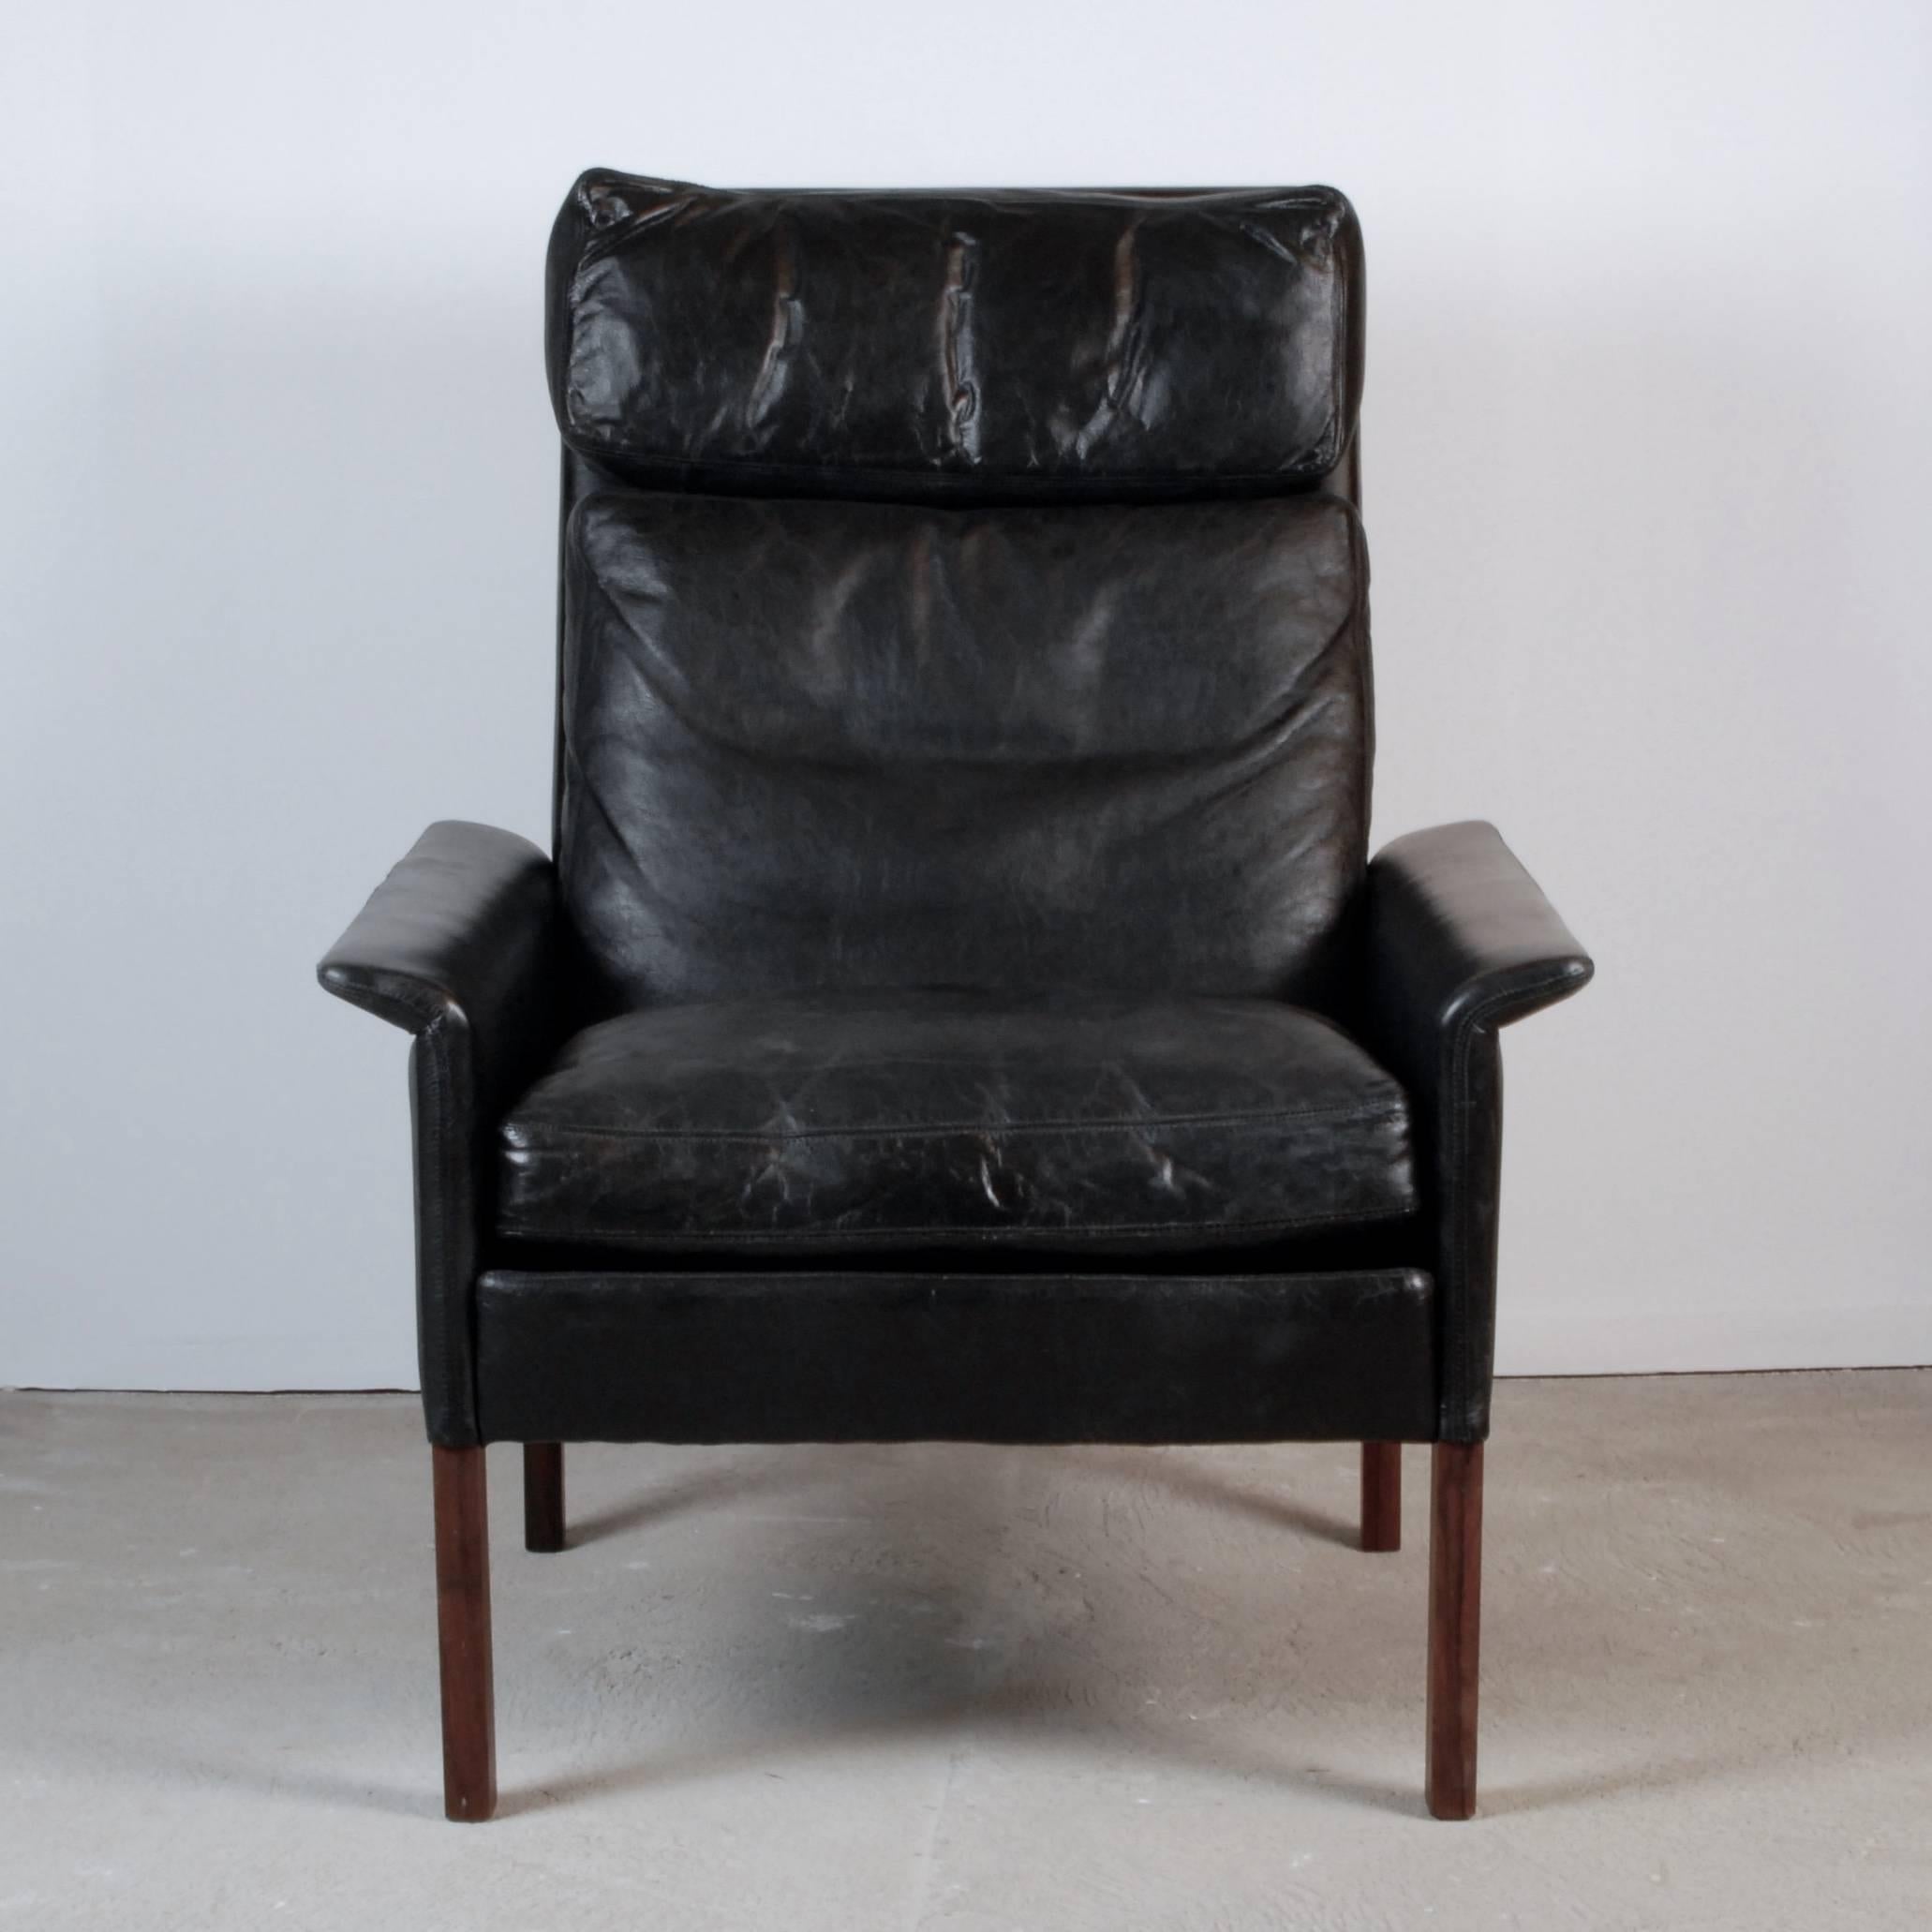 Hans Olsen armchair in black leather.
Feather filled comfort cushions.
Square Brazilian rosewood legs.
Very attractive Patina.
  